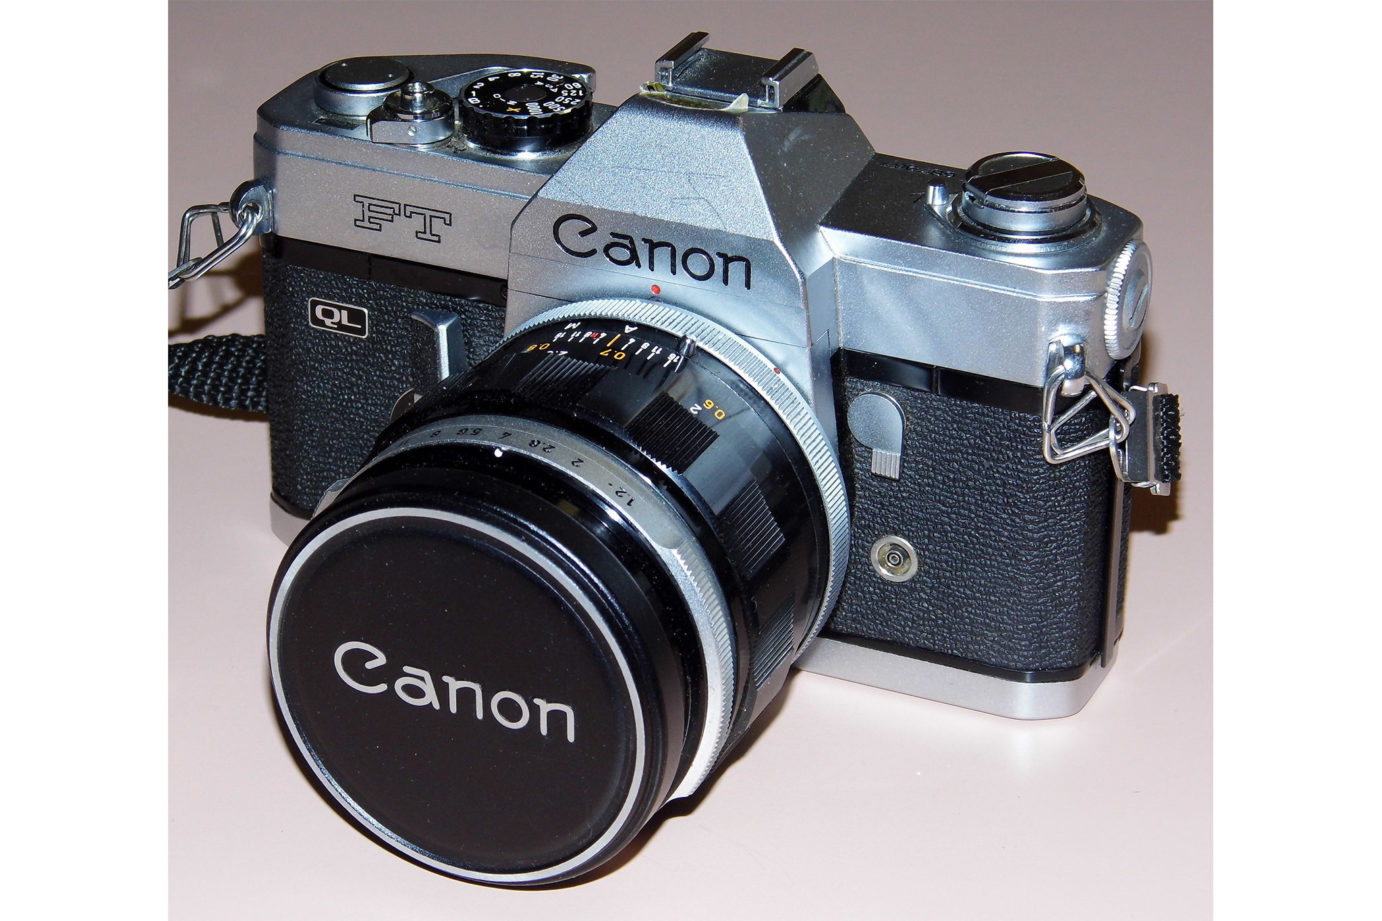 Canon FT QL - Overview over the SLR camera for 35mm film